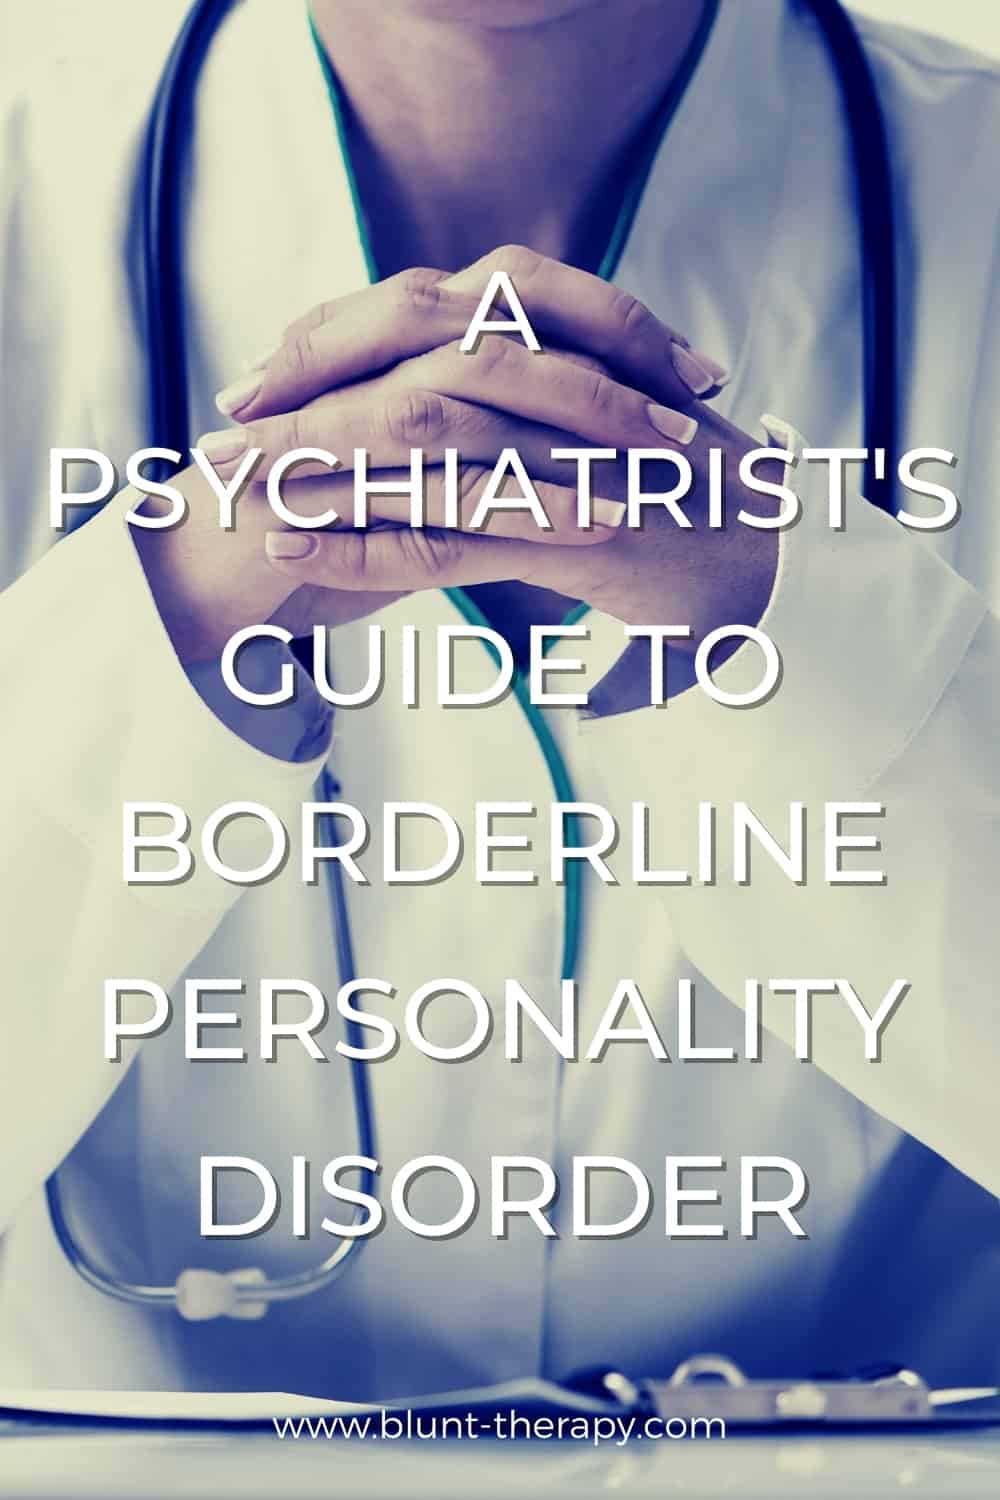 A Psychiatrist's Guide To Borderline Personality Disorder